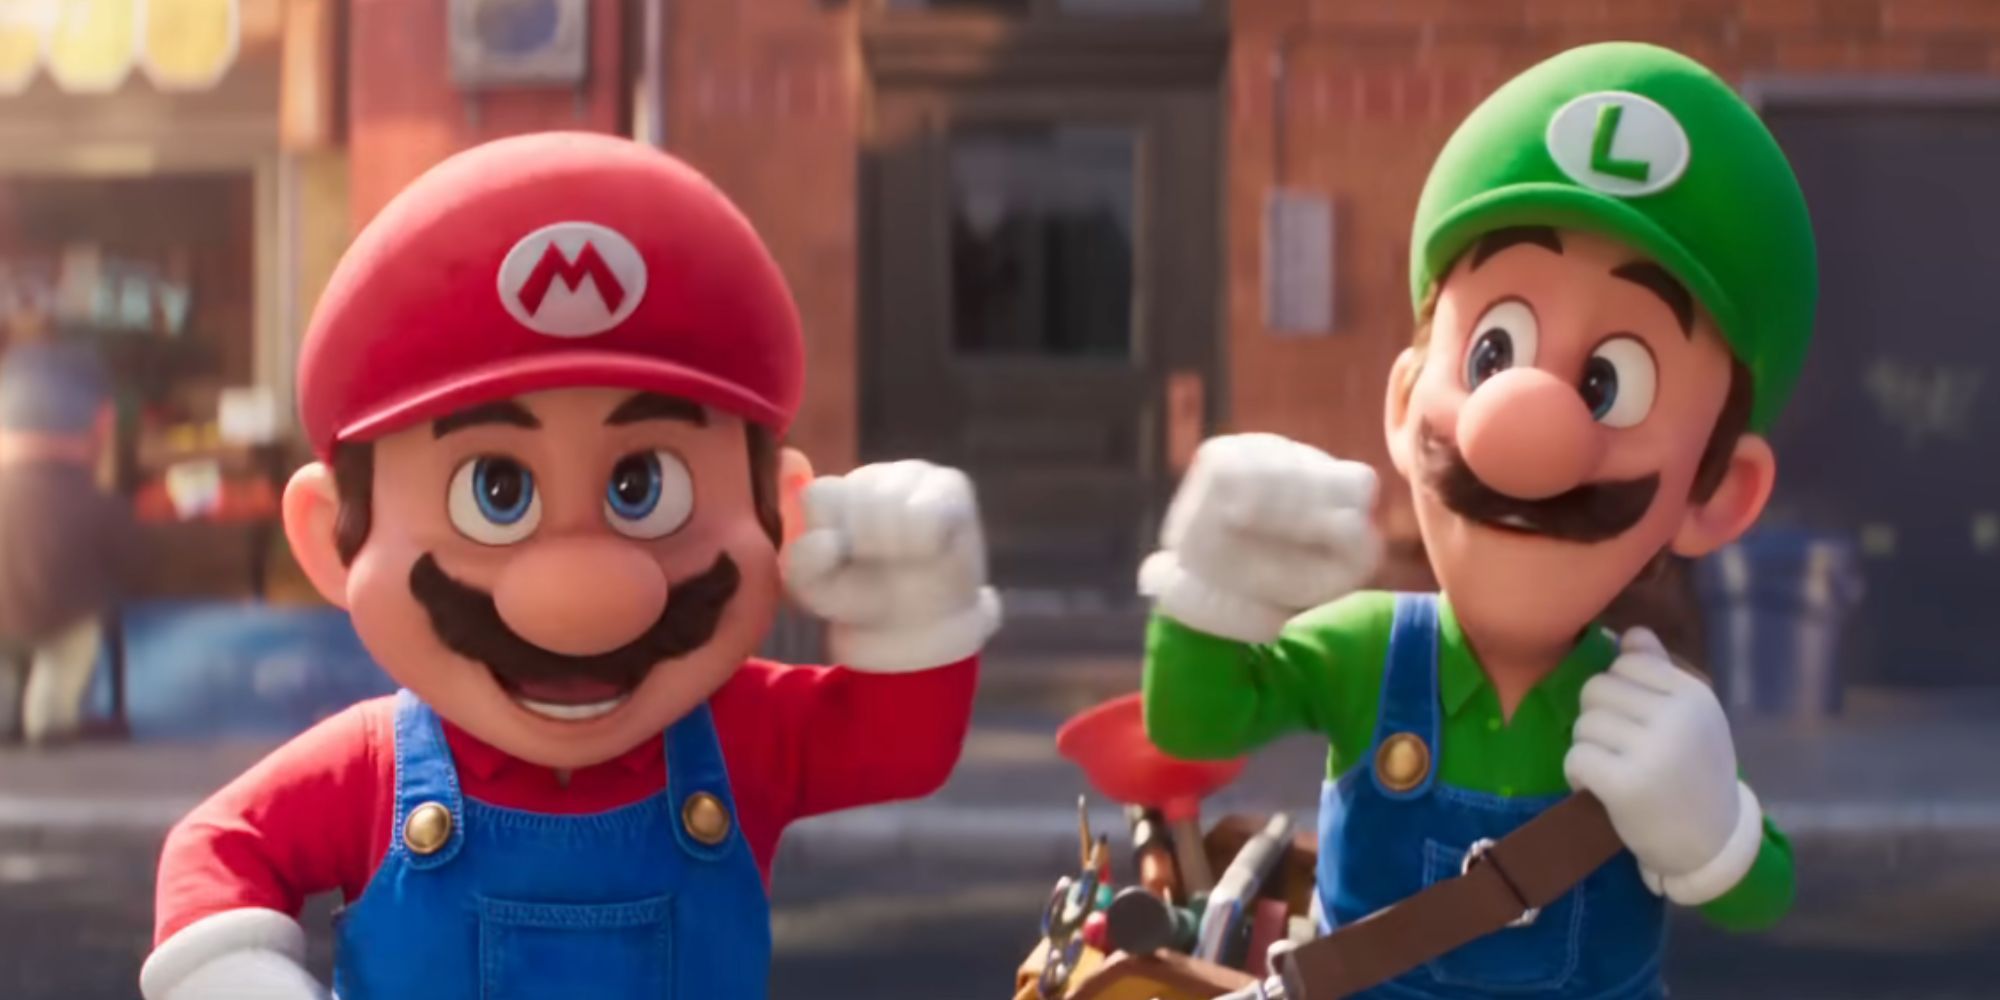 Mario and Luigi bump fists on the streets of Brooklyn